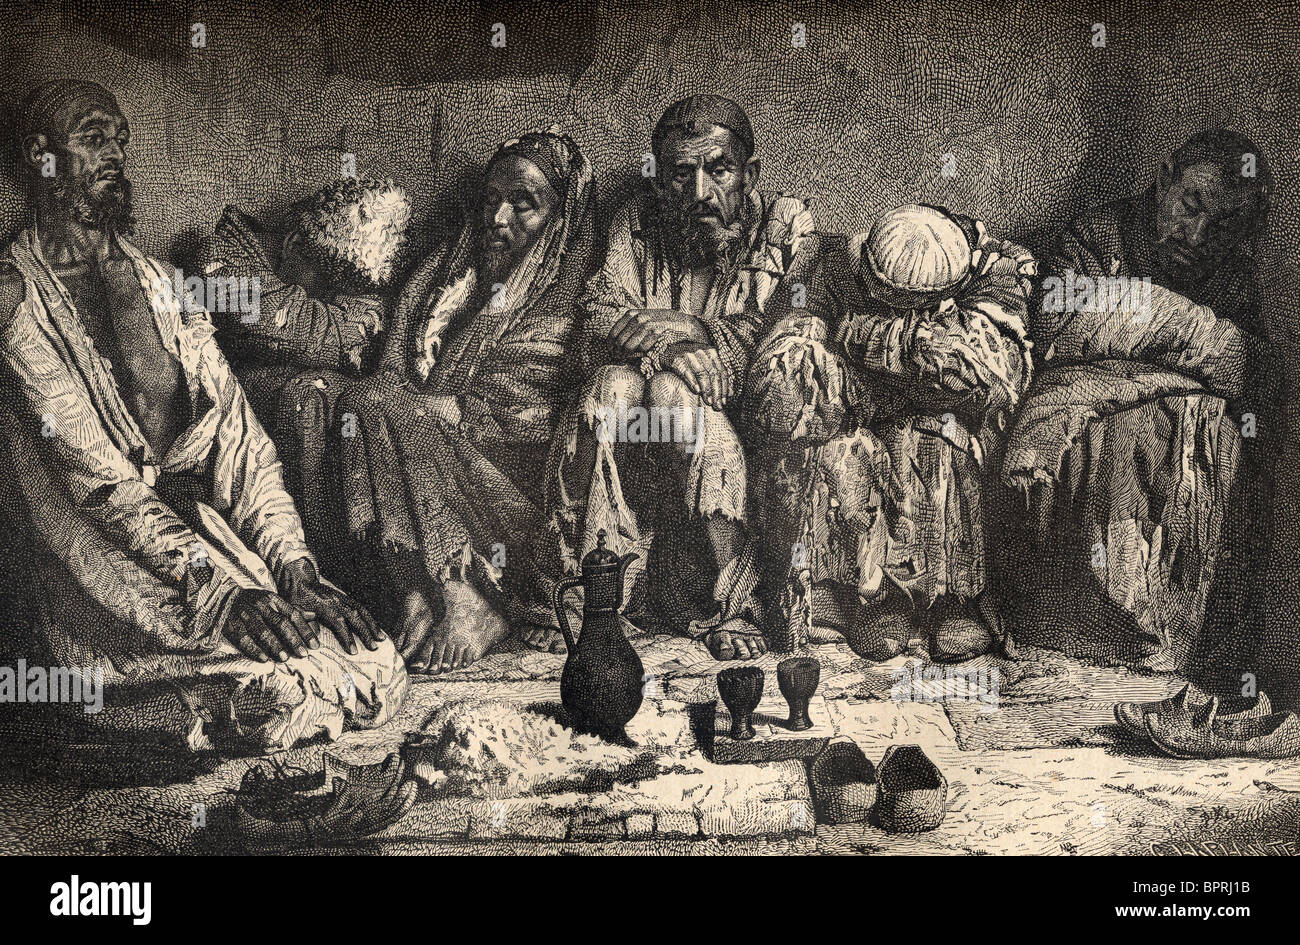 An opium den in central Asia in the 19th century. Stock Photo